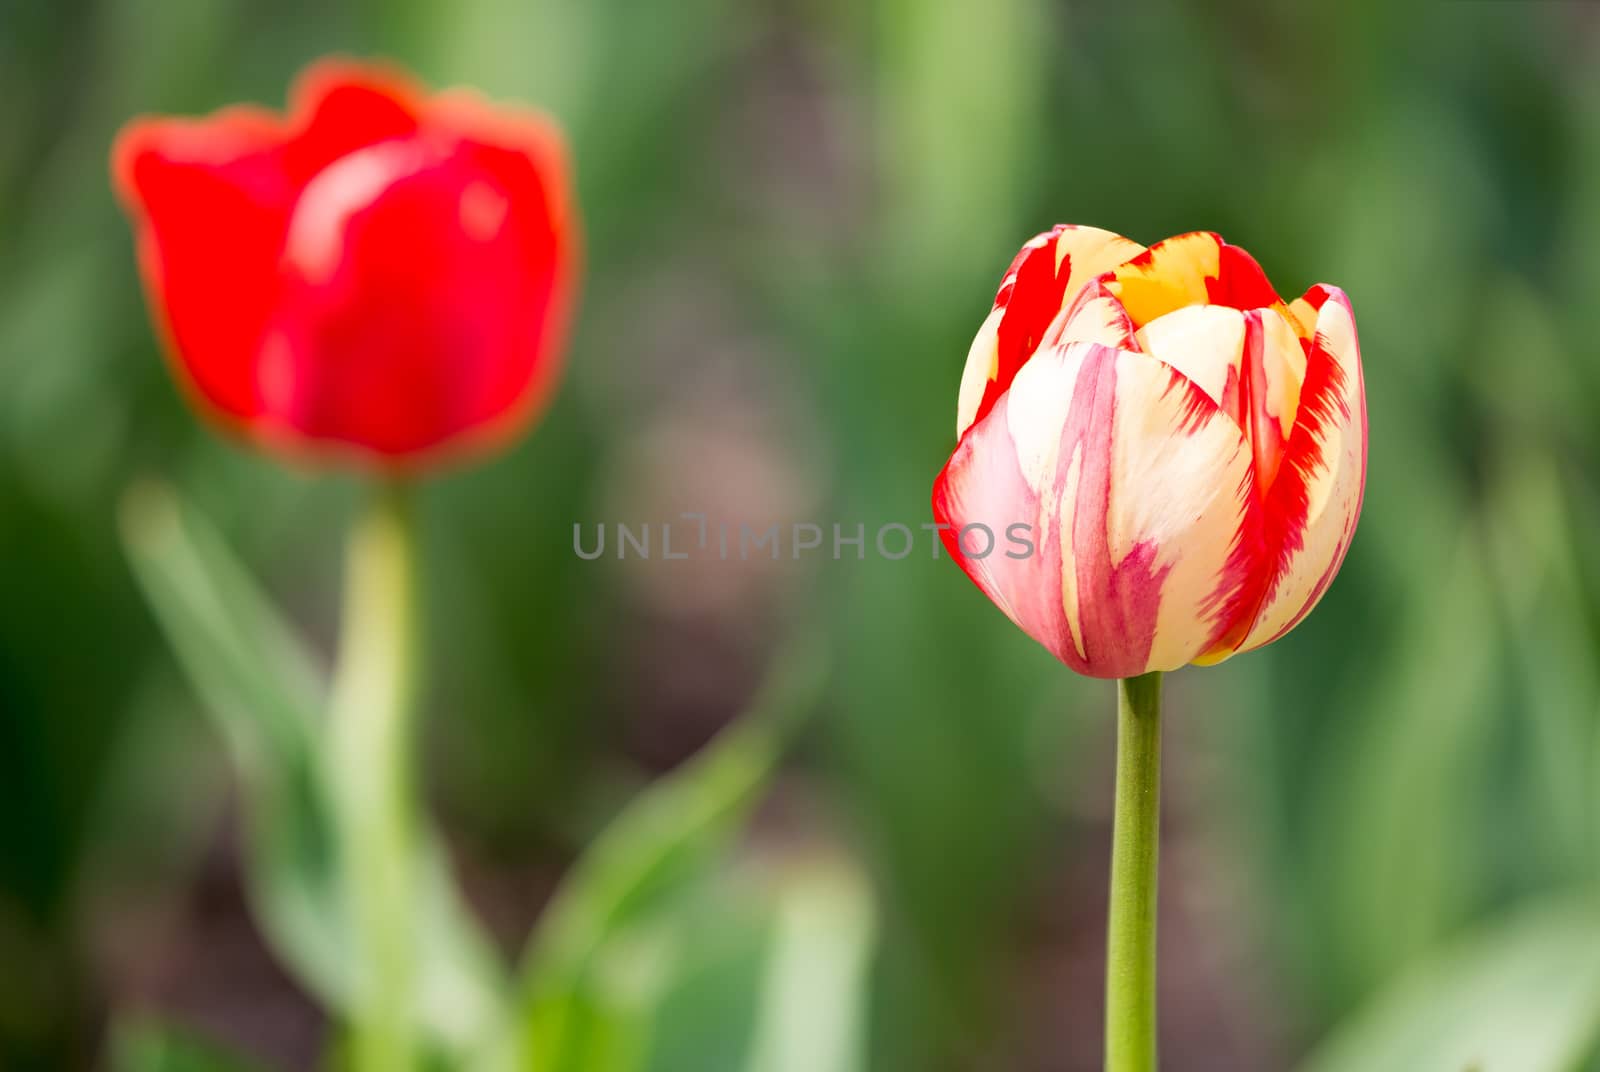 A delicate red and white tulip under the warm spring sun